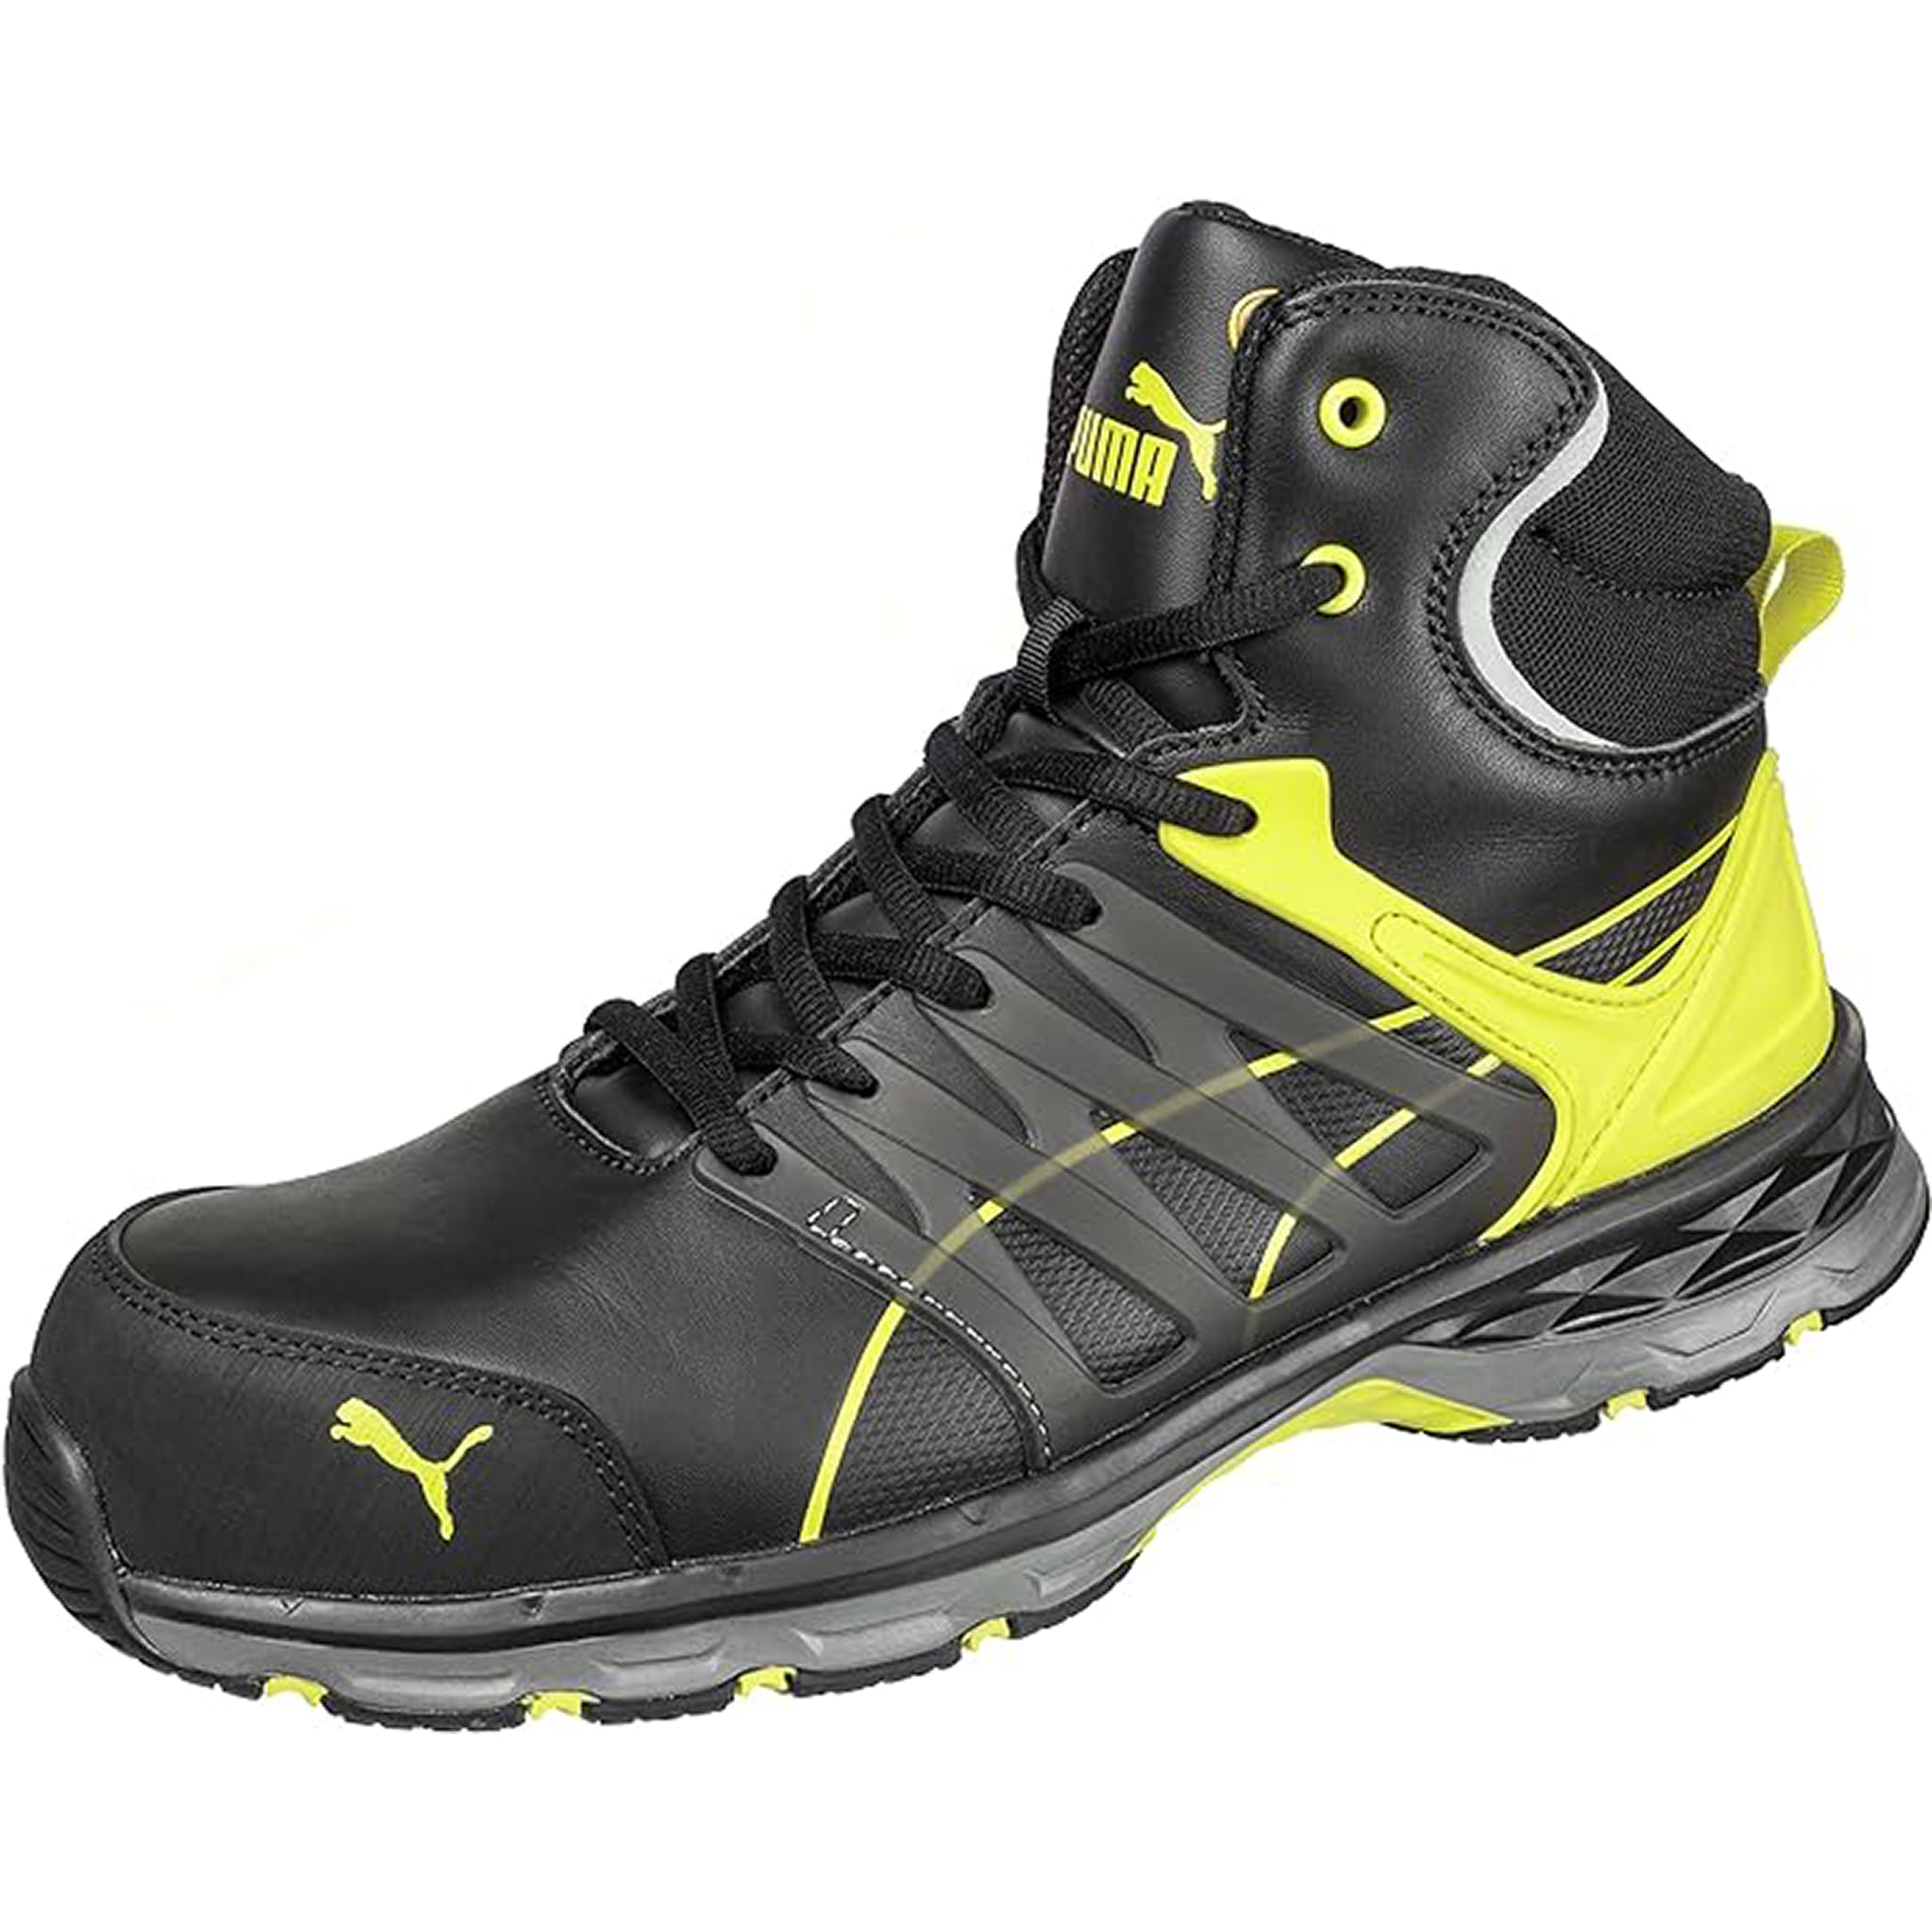 Puma SAFETY VELOCITY 2.0 Mid S3 ESD SRC Work Boots Shoes Leather Cap Toe Yellow